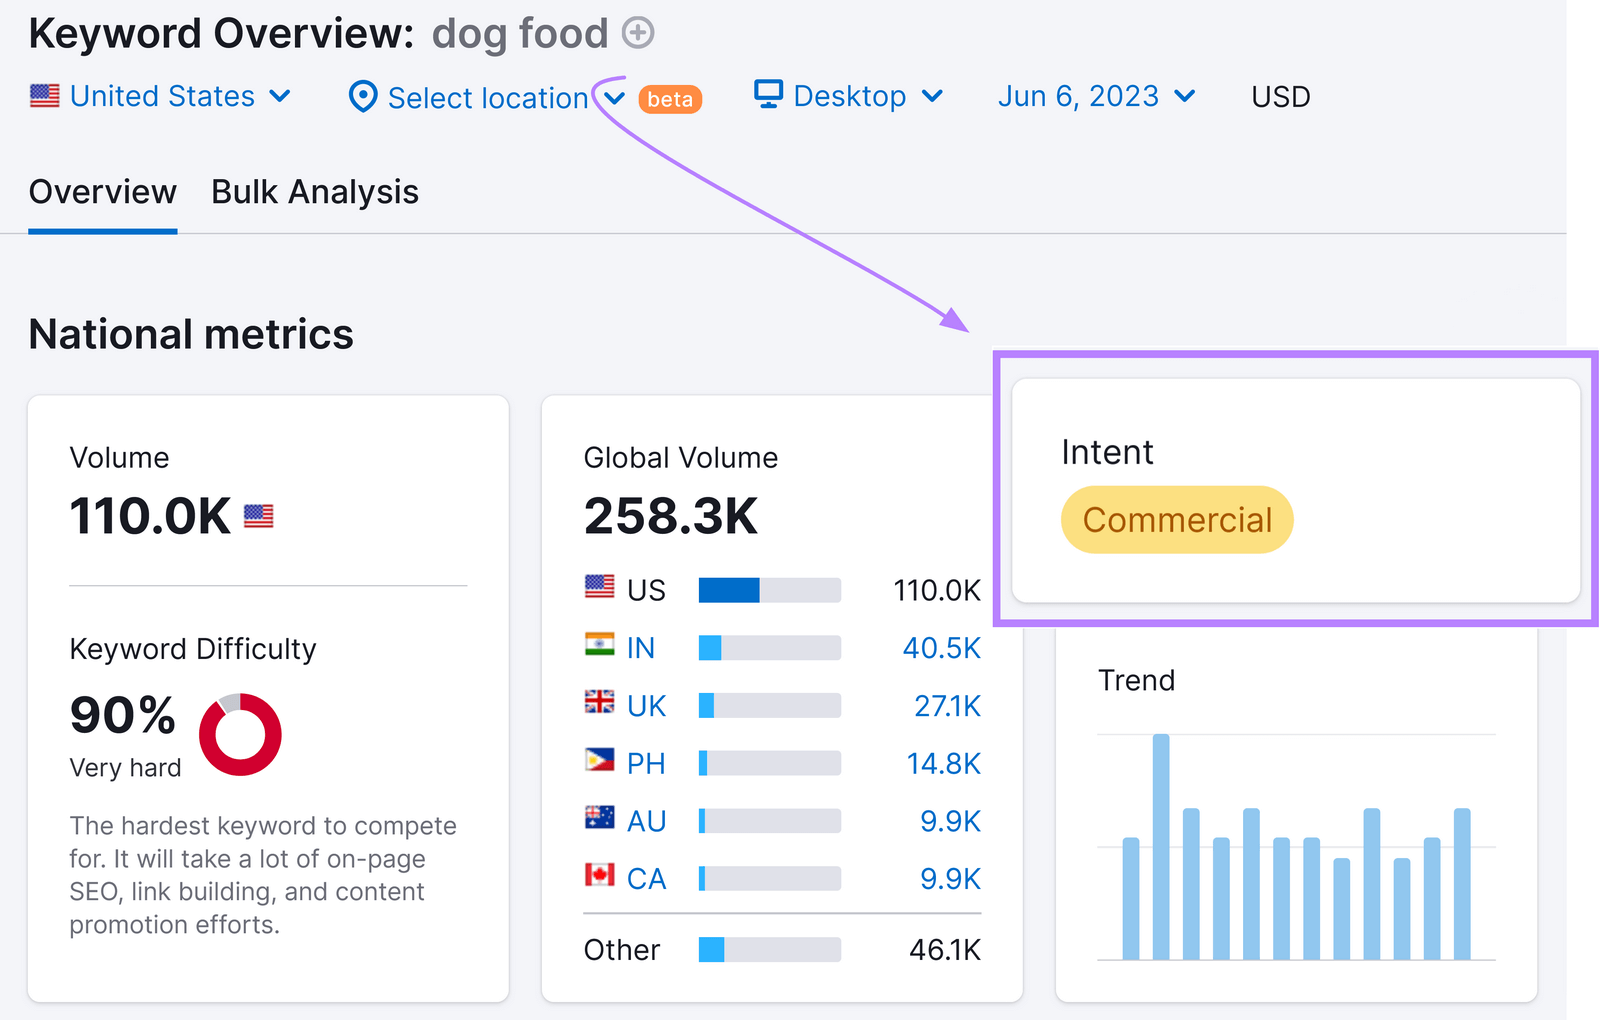 “Intent” box displaying "commercial" intent for "dog food" keyword